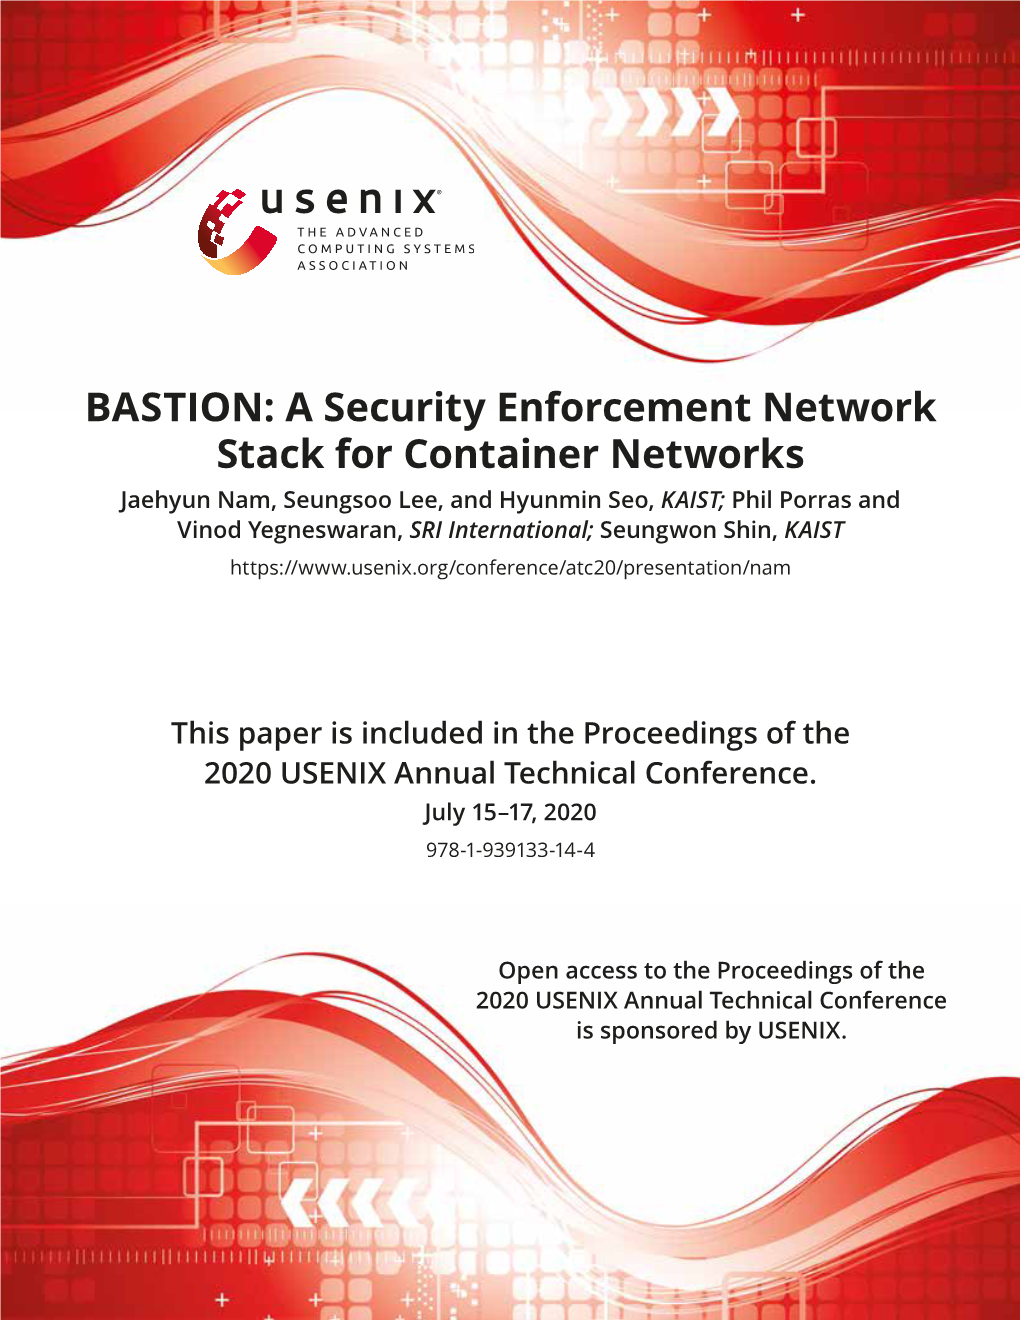 BASTION: a Security Enforcement Network Stack for Container Networks